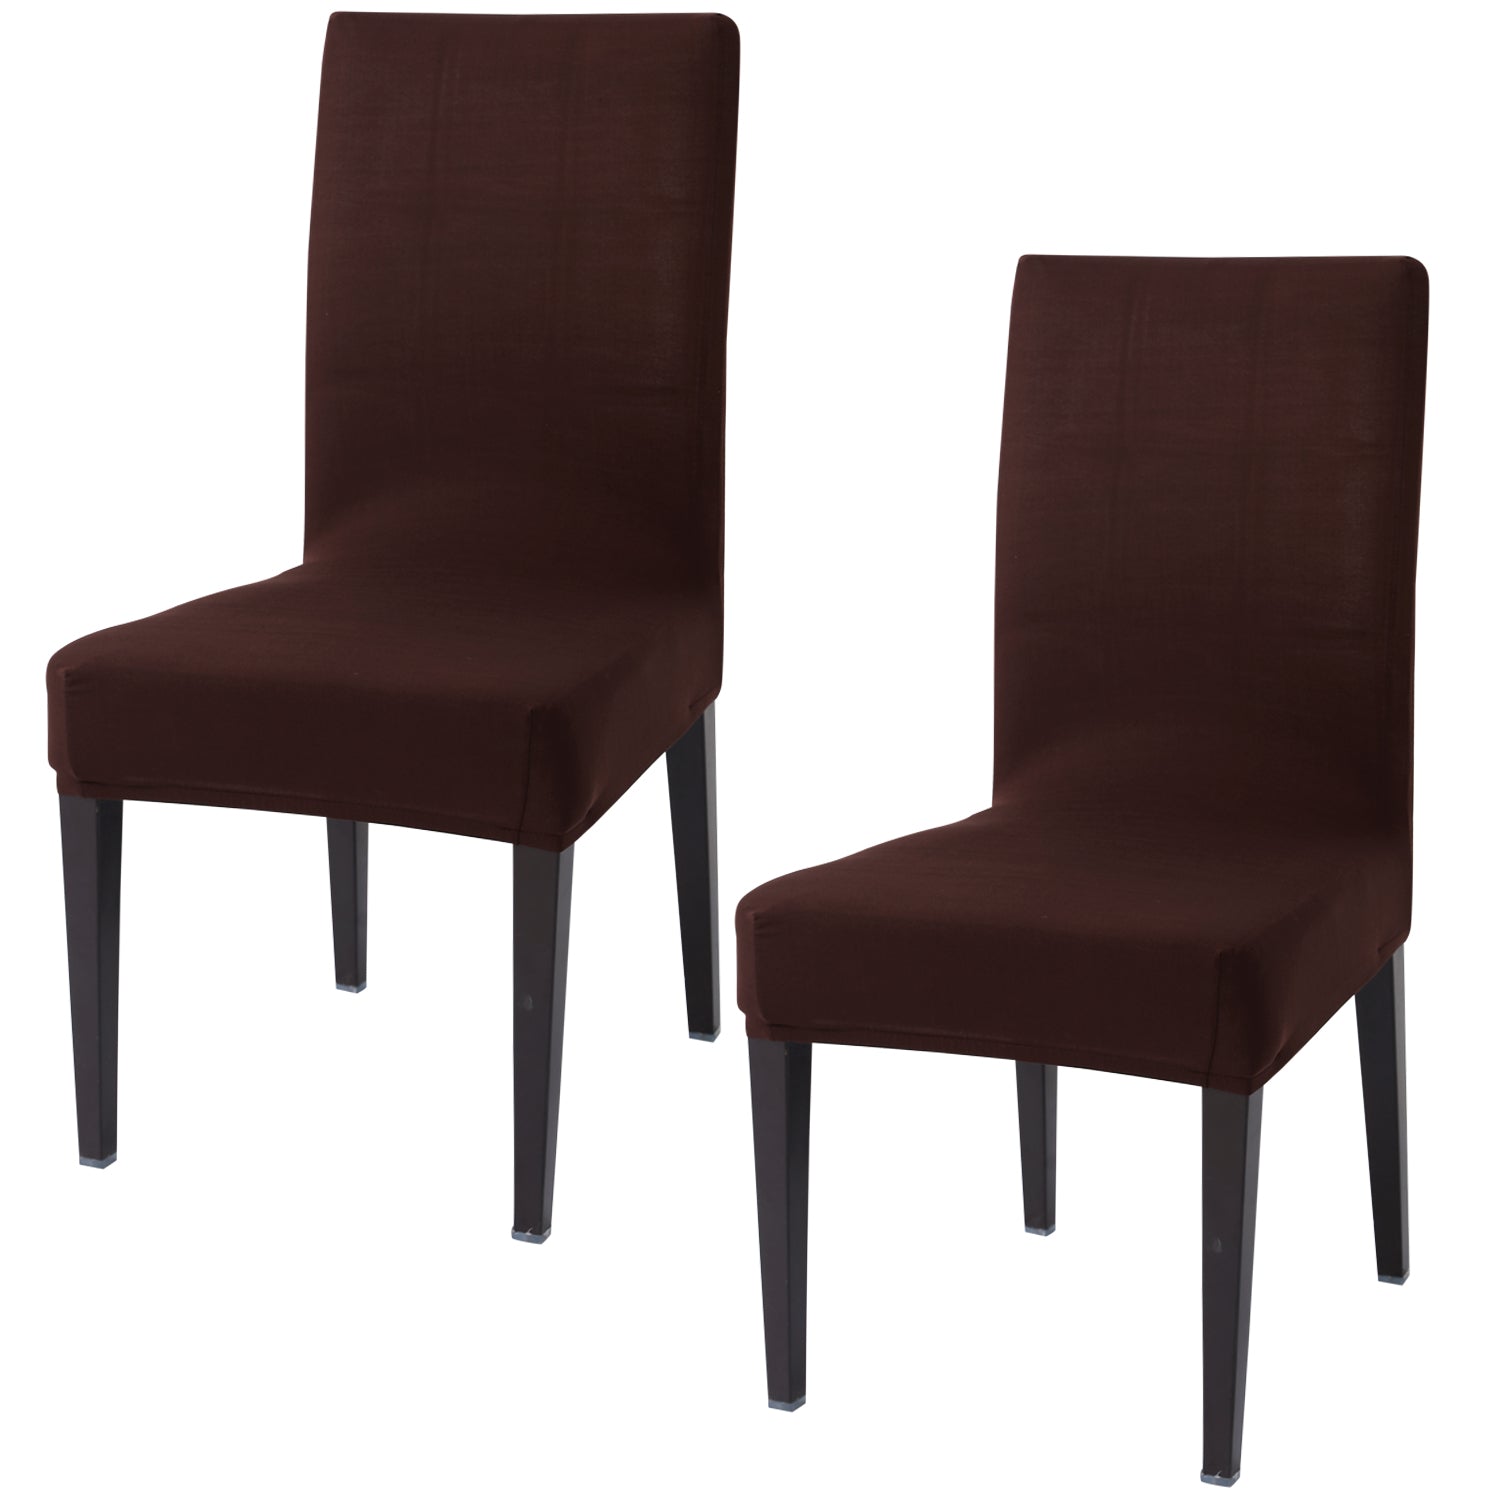 Elastic Stretchable Dining Chair Cover, Chocolate Brown